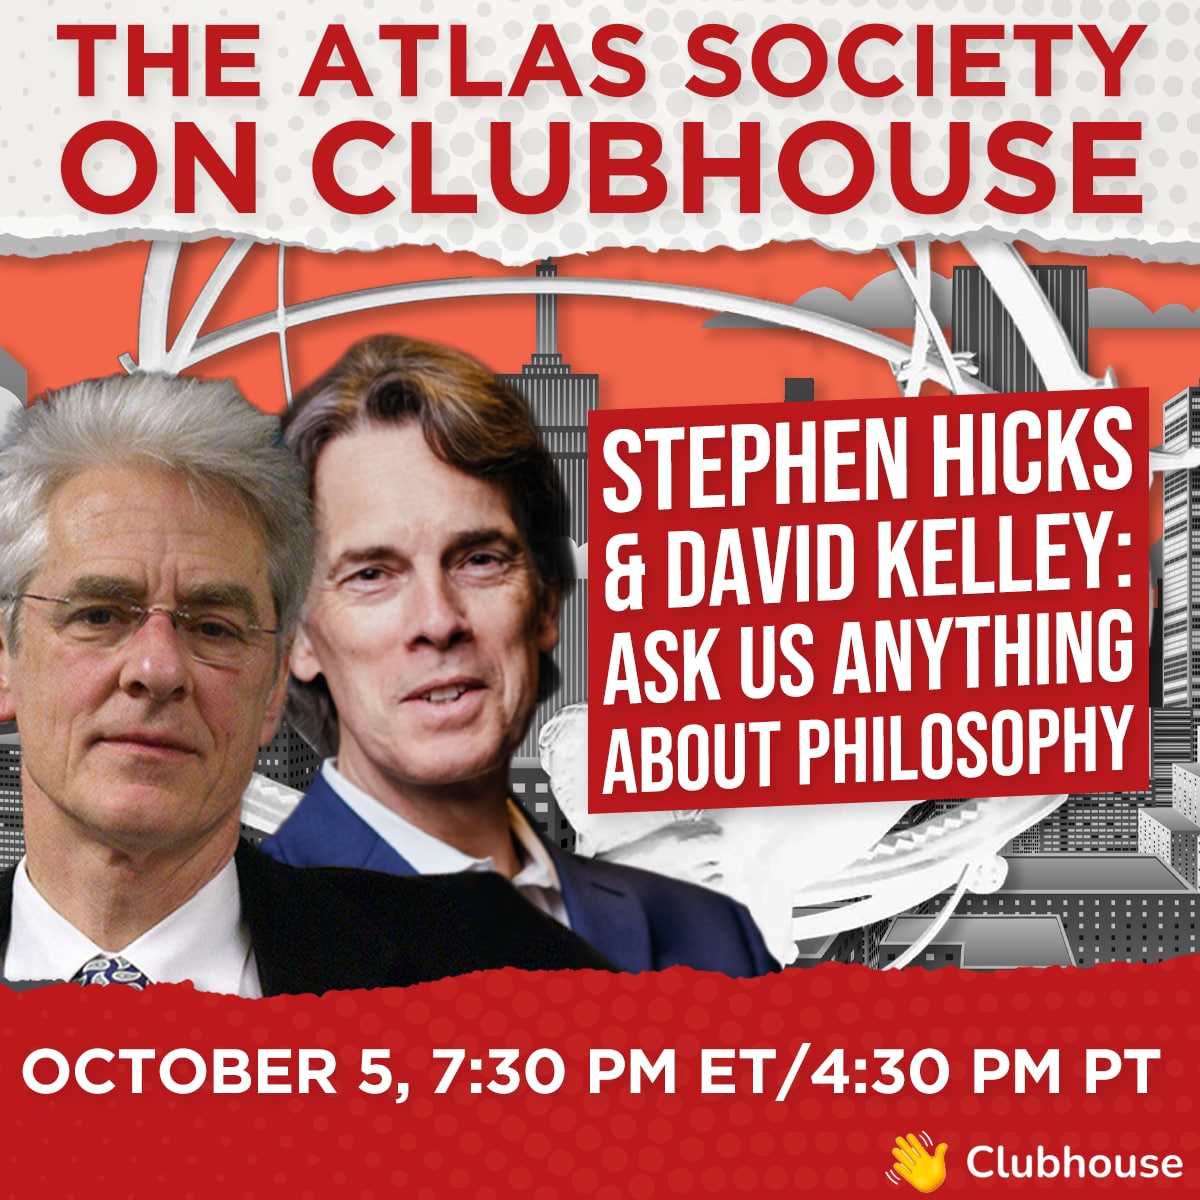 Stephen Hicks & David Kelley - Ask Us Anything About Philosophy